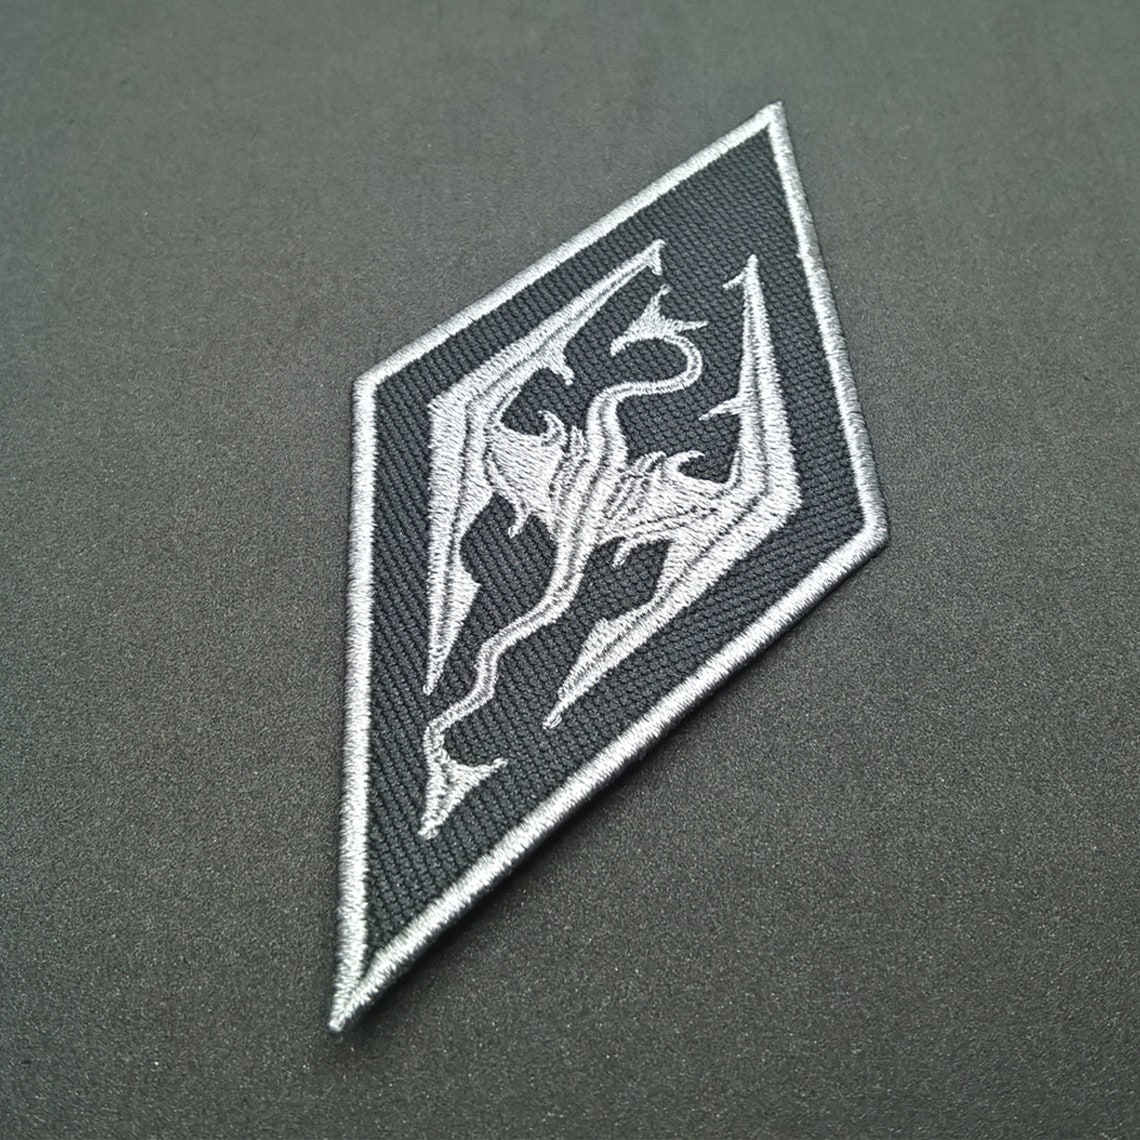 Skyrim Embroidered Patch The Elder Scrolls Videogame | Etsy